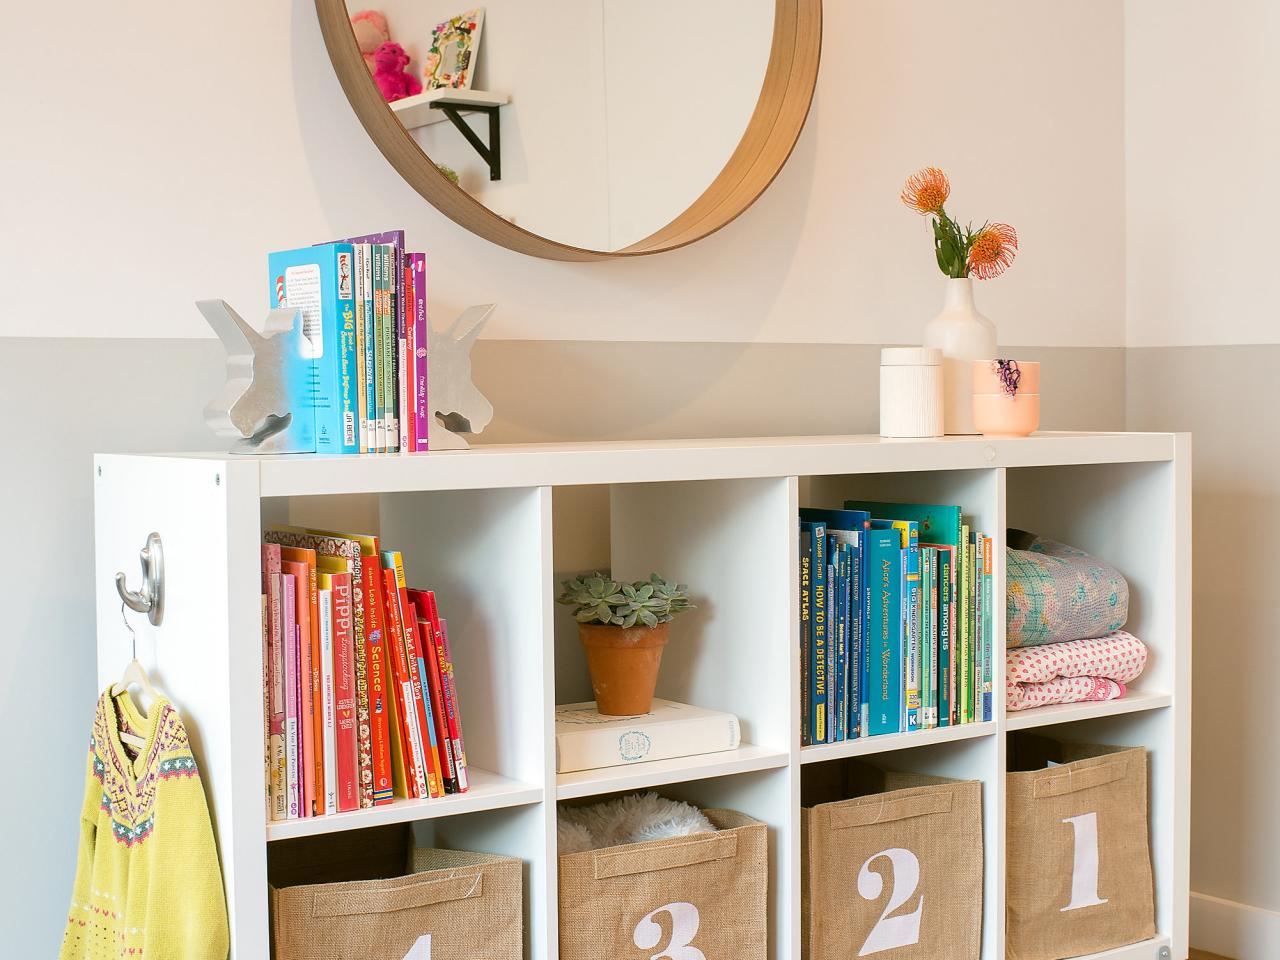 30 Ways To Creatively Add More Storage Space In Your Kids' Room